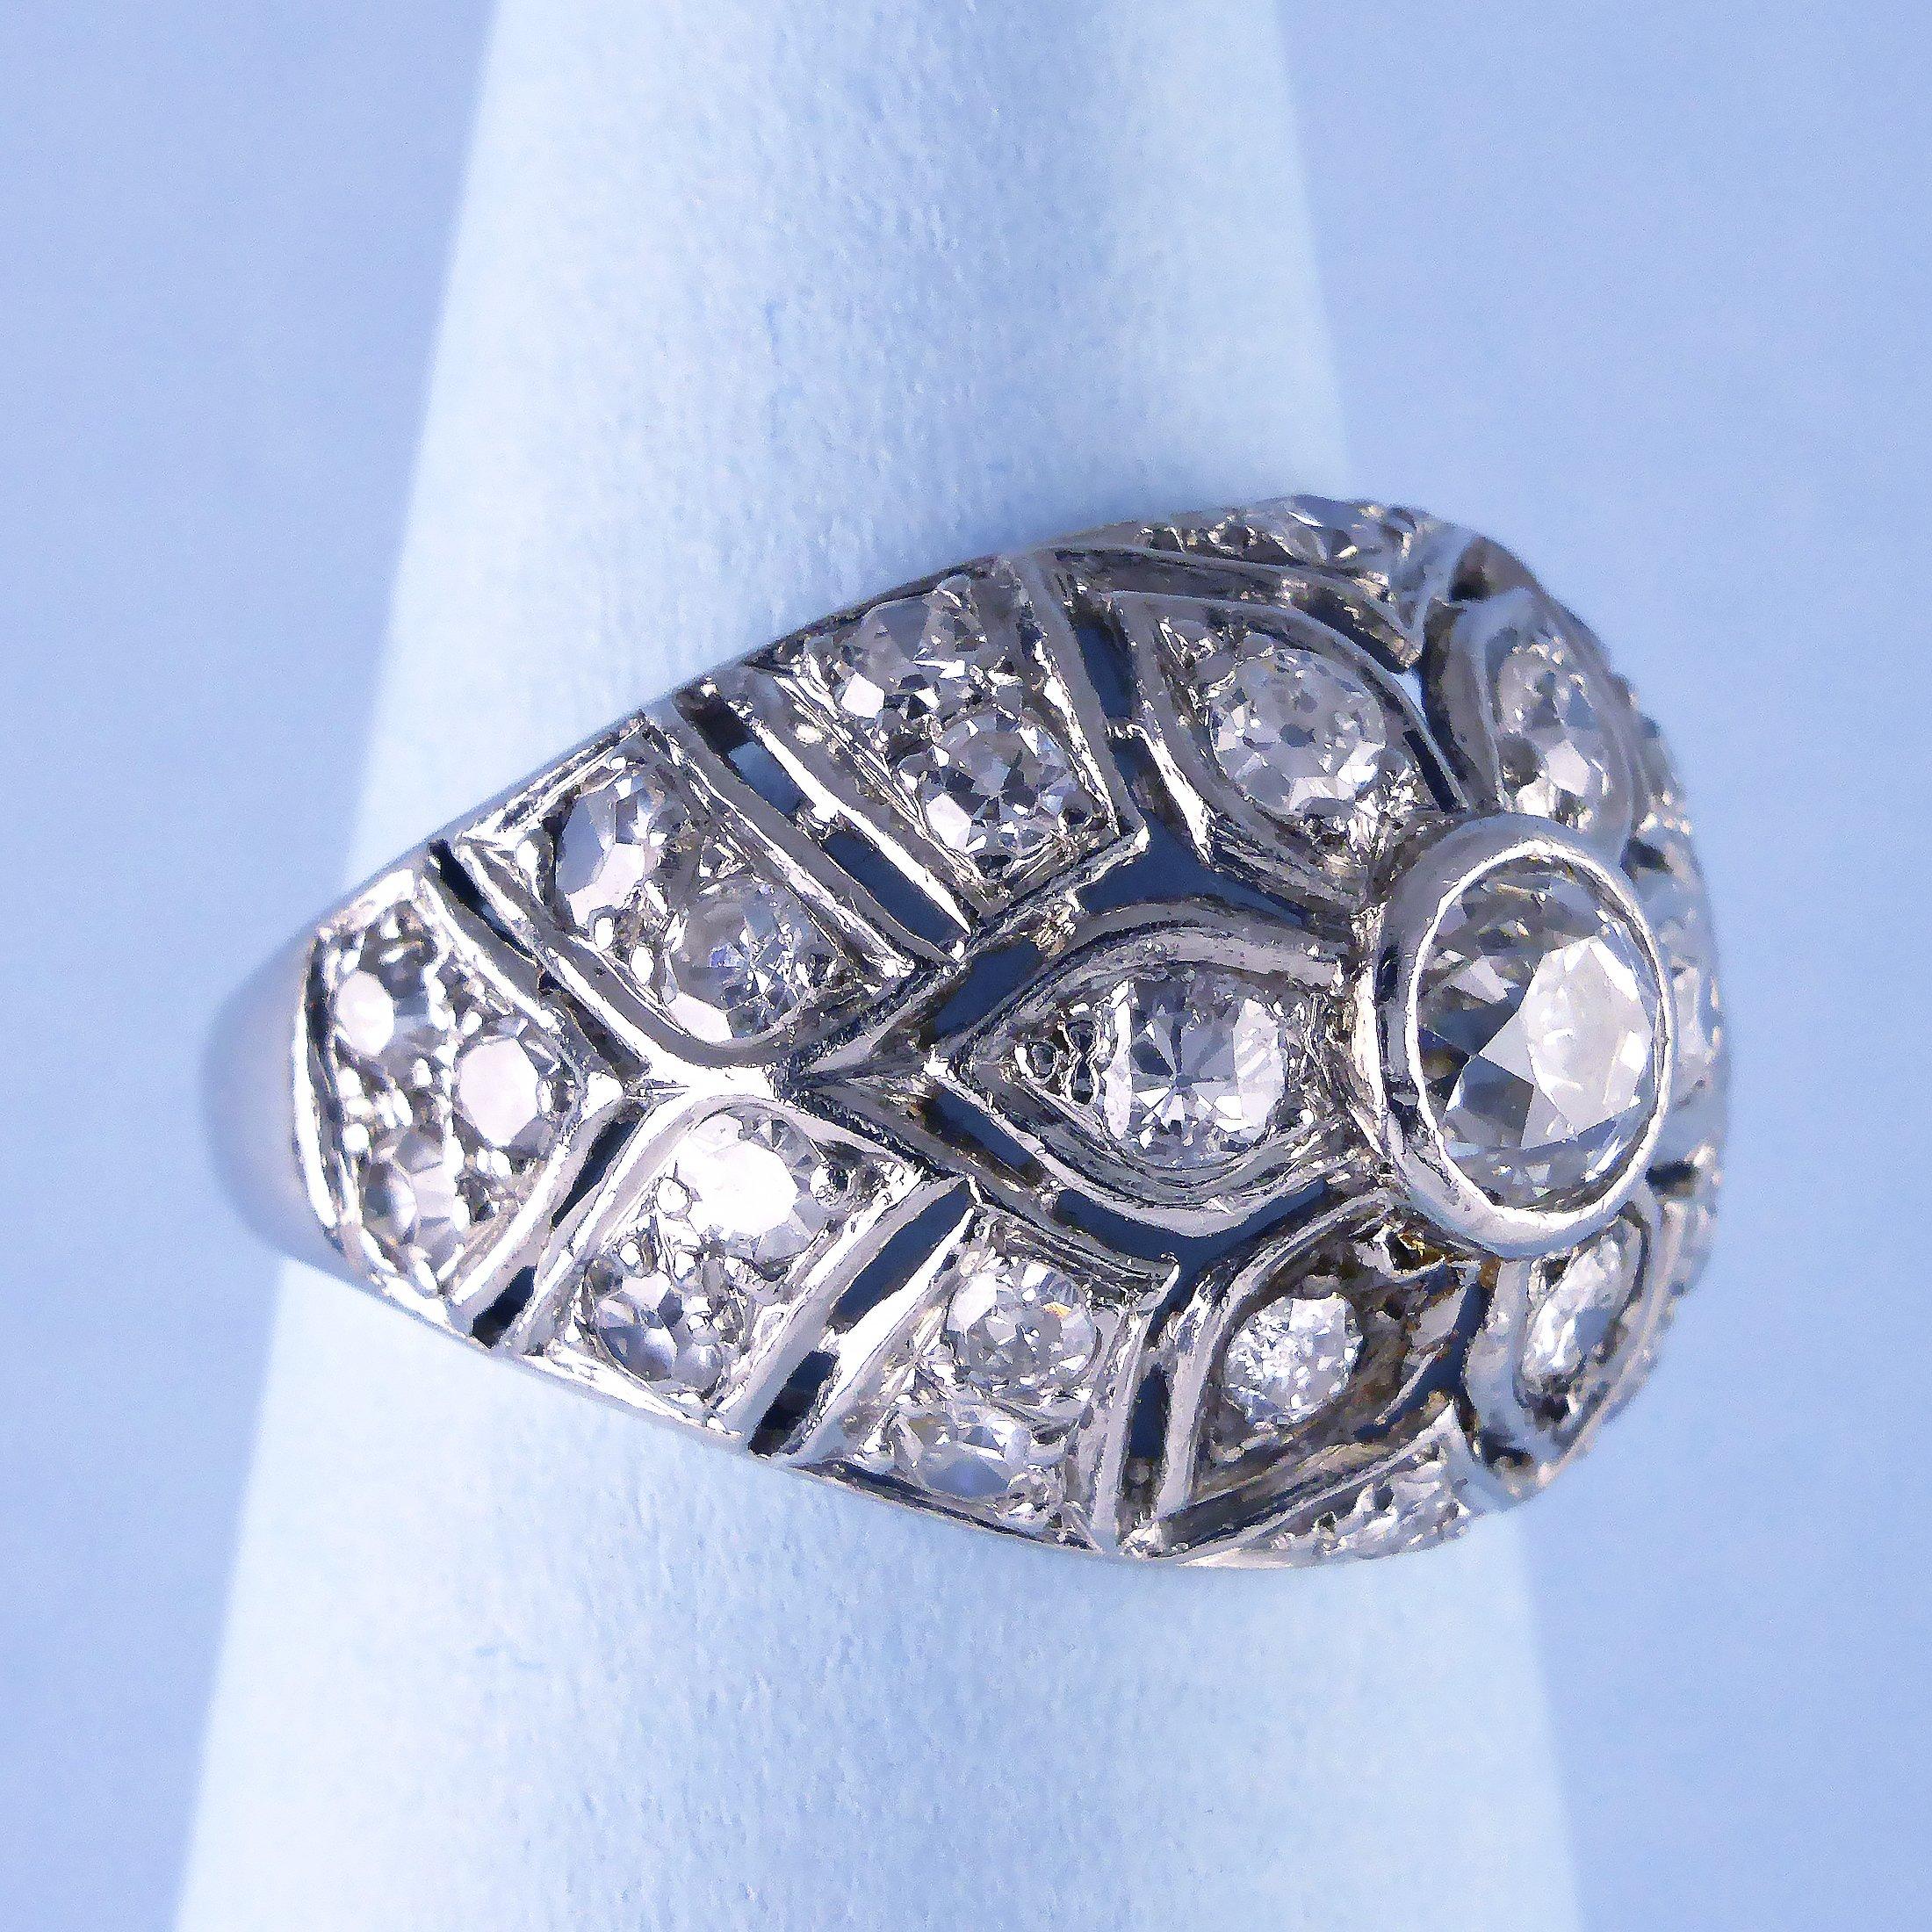 A period bombe ring made circa 1950.

The 18ct white gold ring set with diamonds in a pierced mosaic central flower motif (Diamonds approx 1.40cts).

Measurements at longest/widest point

Dimensions
Width 20mm
Height 15mm

Ring Size:

M (UK)
6 1/4